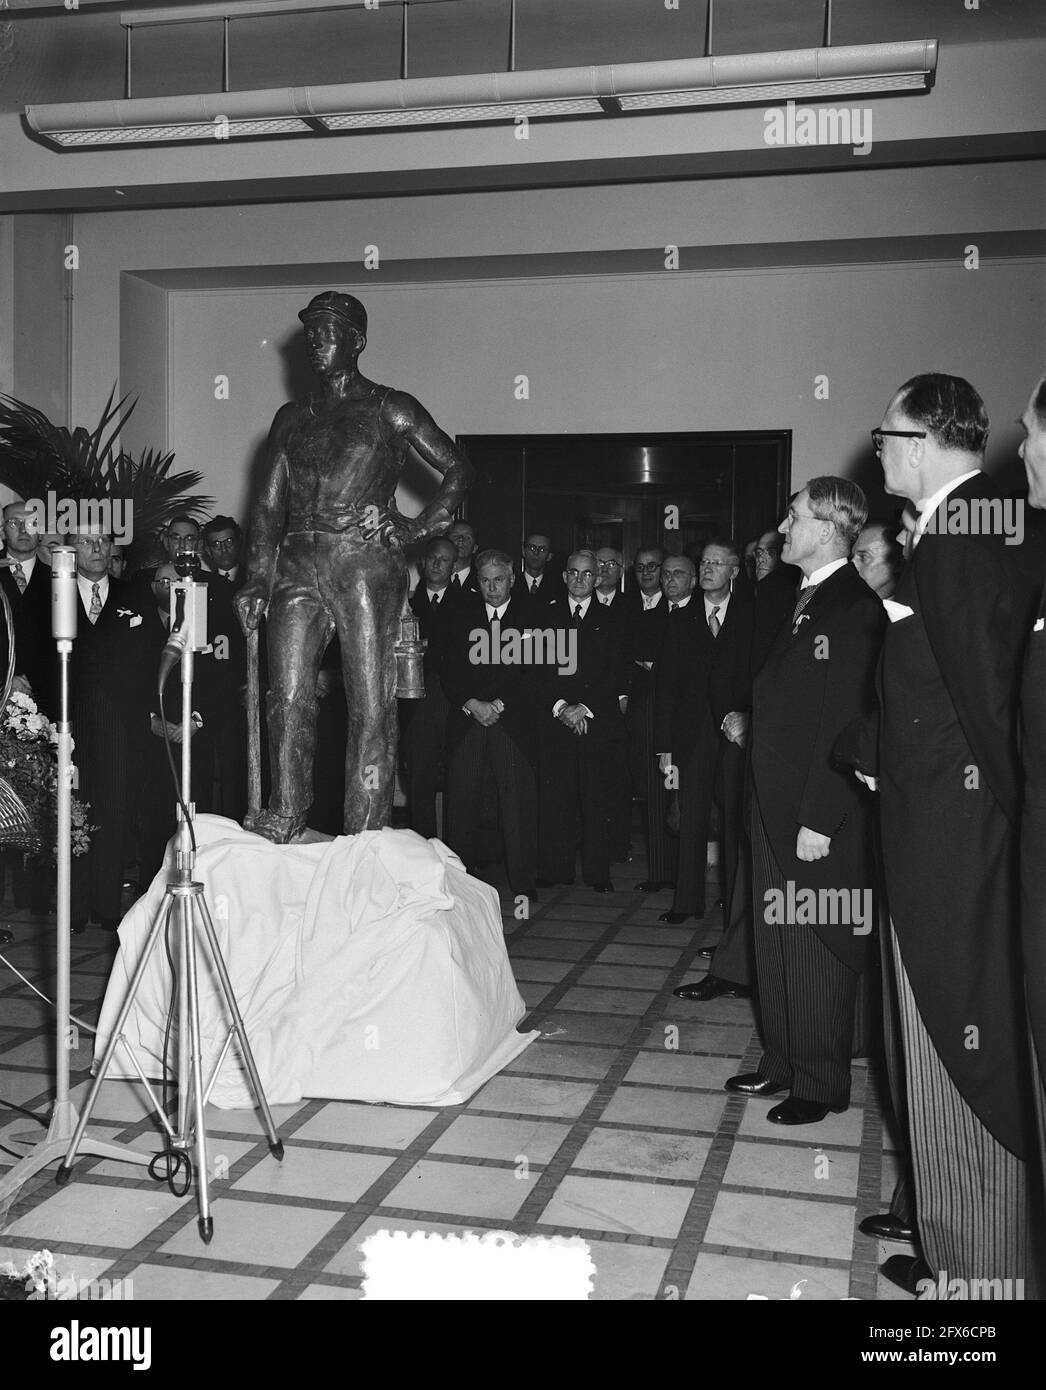 The Golden Jubilee of the State Mines in Limburg. A statue of a miner was presented by the mine personnel. The unveiling of the statue made by the sculptor Melis. On the right, Dr. Ch. Th. Groothoff (President), May 8, 1952, STAATSMIJNEN (State mines), offers, anniversary, The Netherlands, 20th century press agency photo, news to remember, documentary, historic photography 1945-1990, visual stories, human history of the Twentieth Century, capturing moments in time Stock Photo